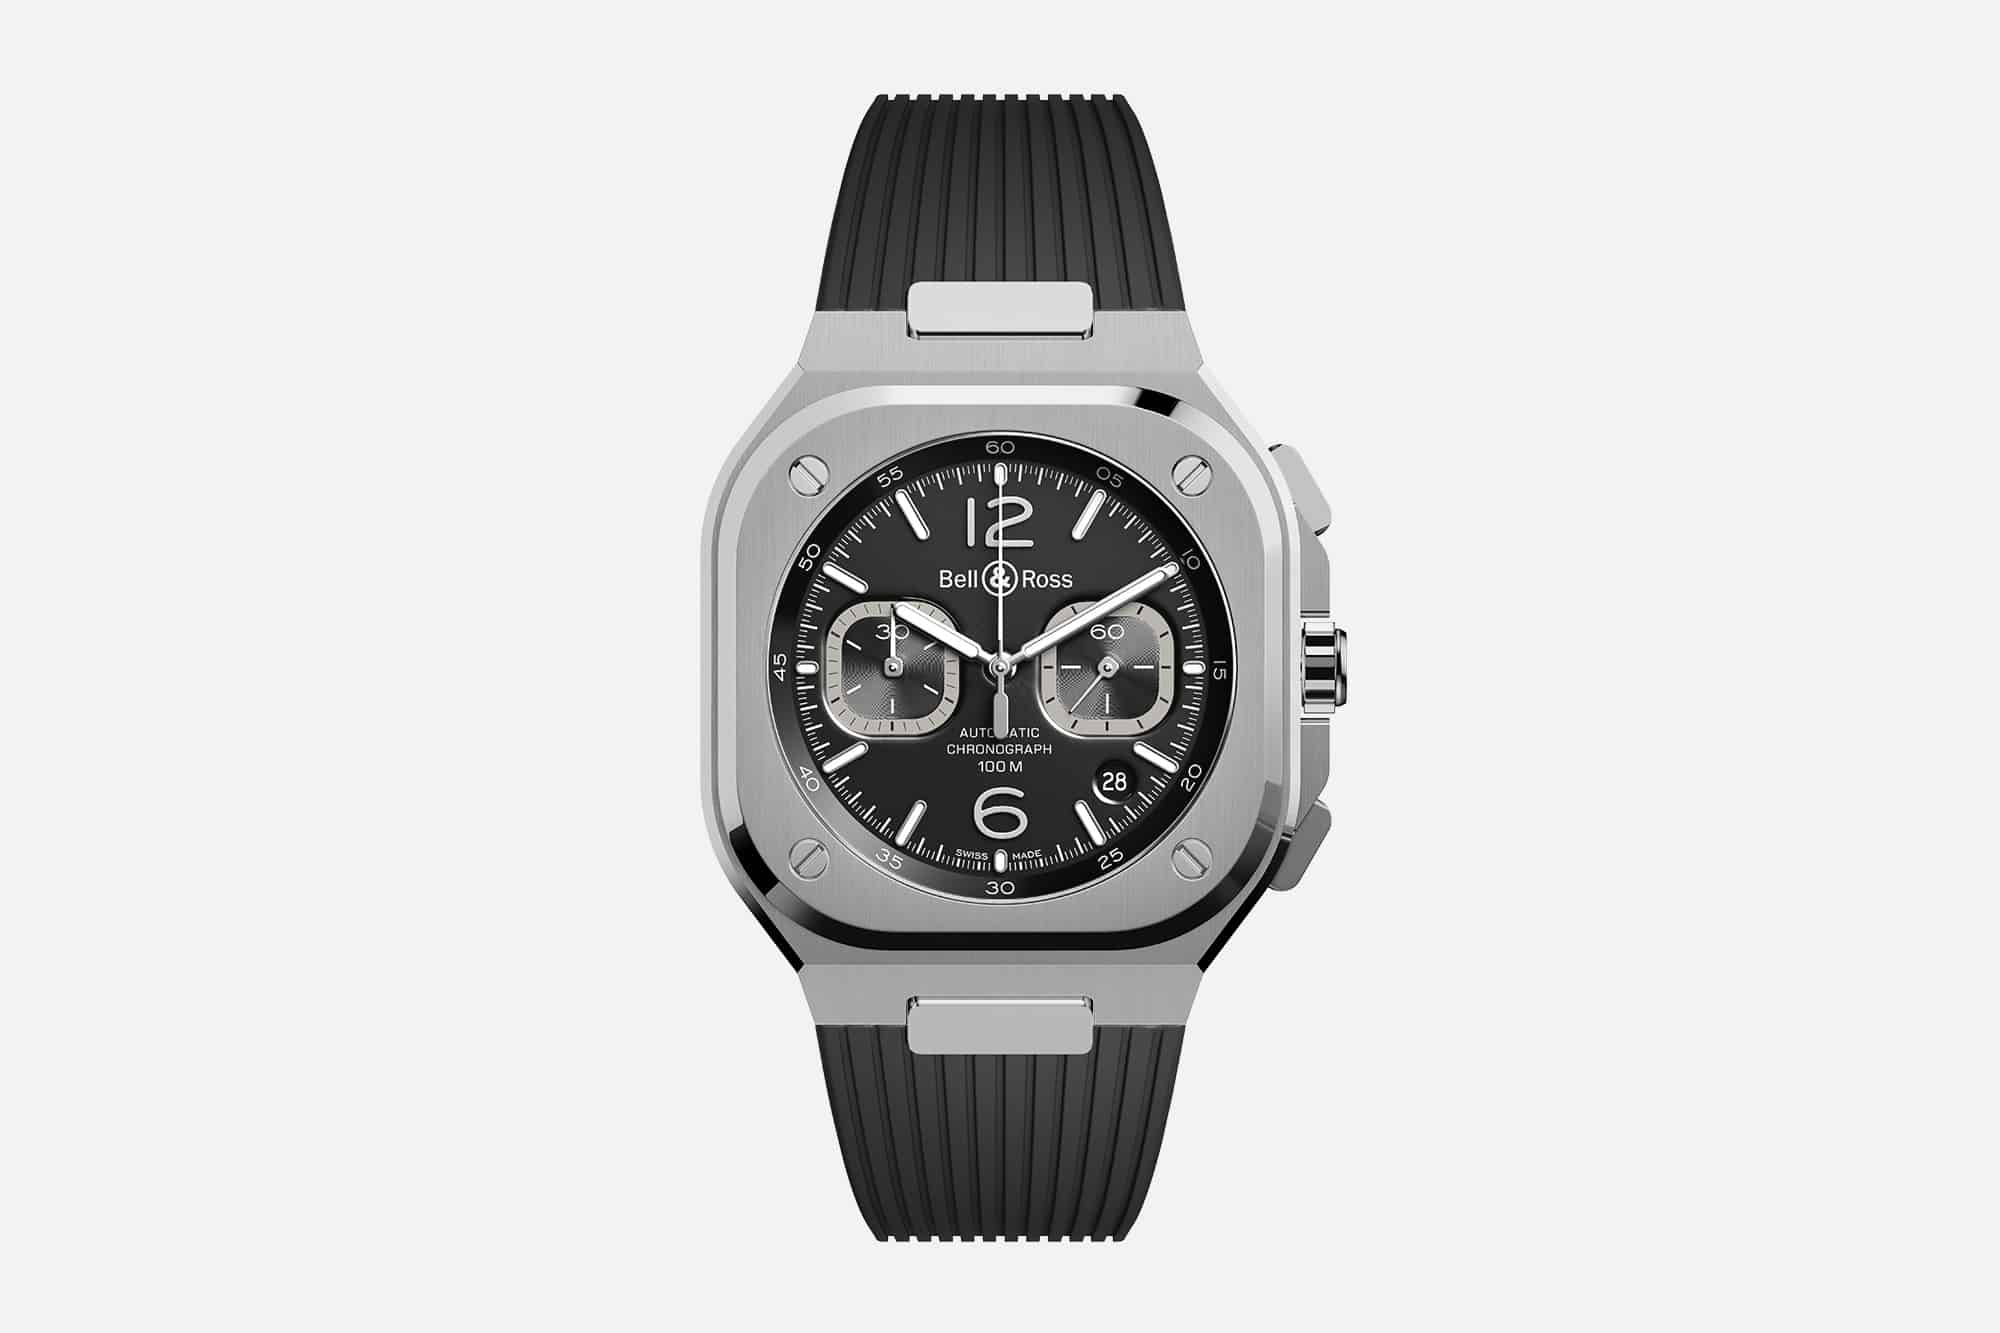 Bell & Ross Returns to the BR 05 Format with a New Chronograph